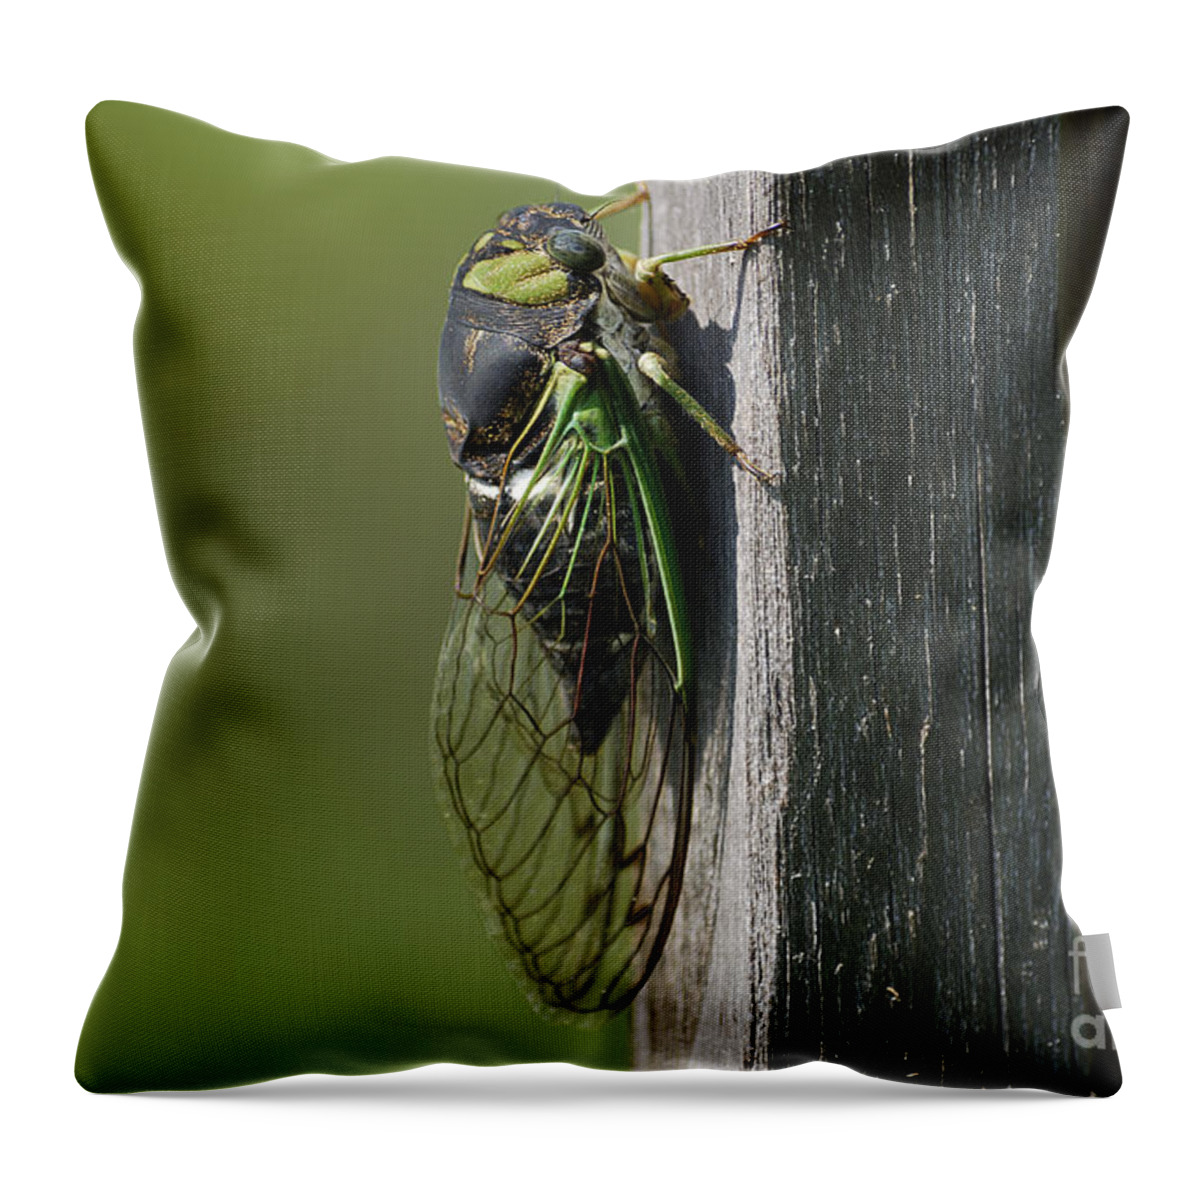 Insects Throw Pillow featuring the photograph Cicada by Randy Bodkins